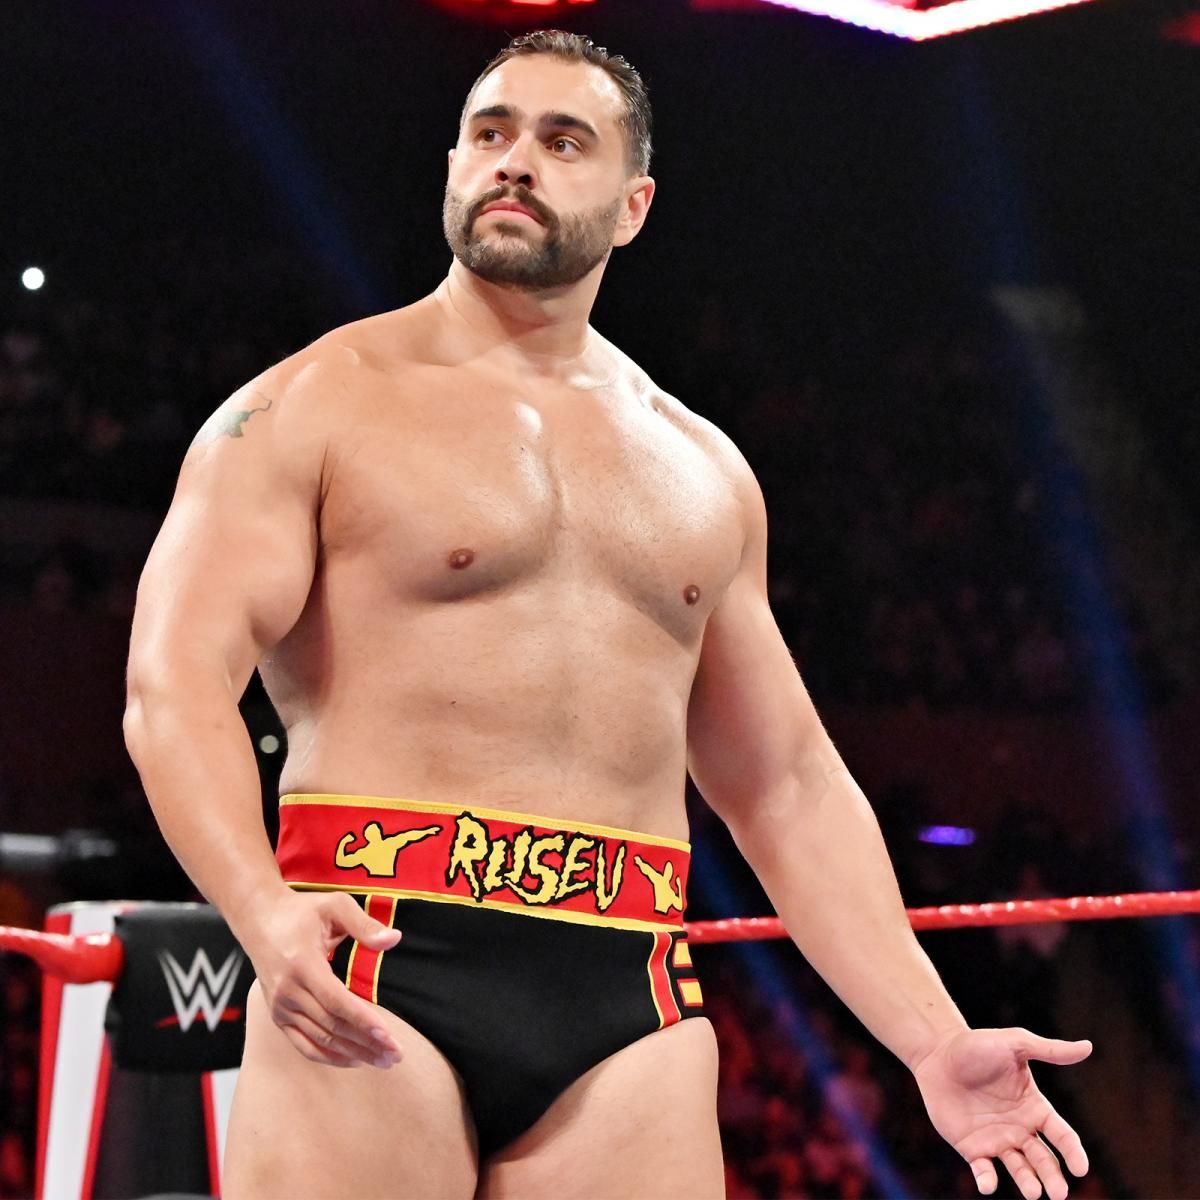 Former WWE Superstar Rusev announces he has COVID-19